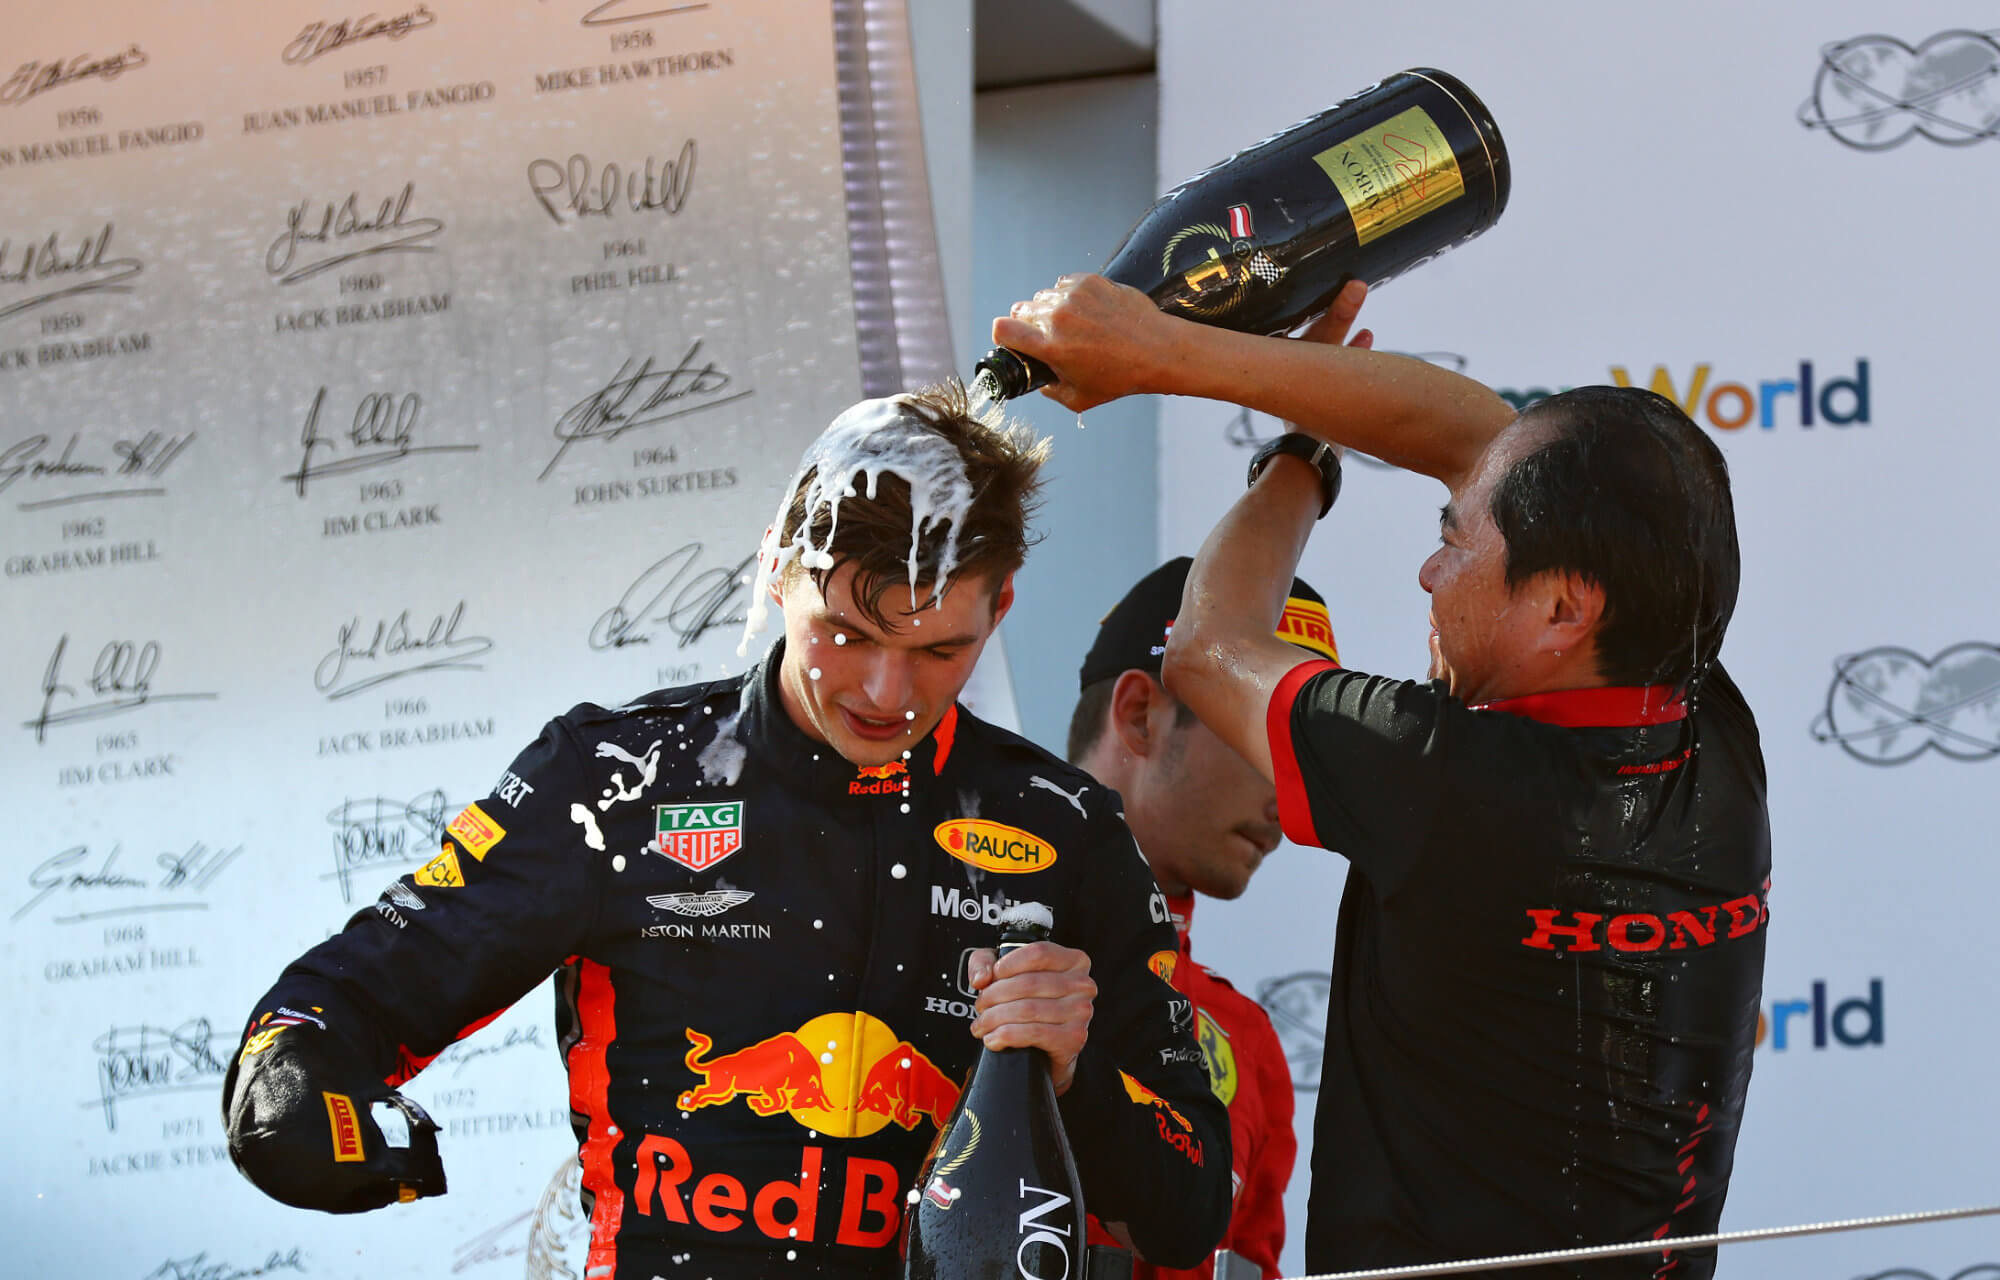 Momentous day for Honda as Max Verstappen takes victory in Austria